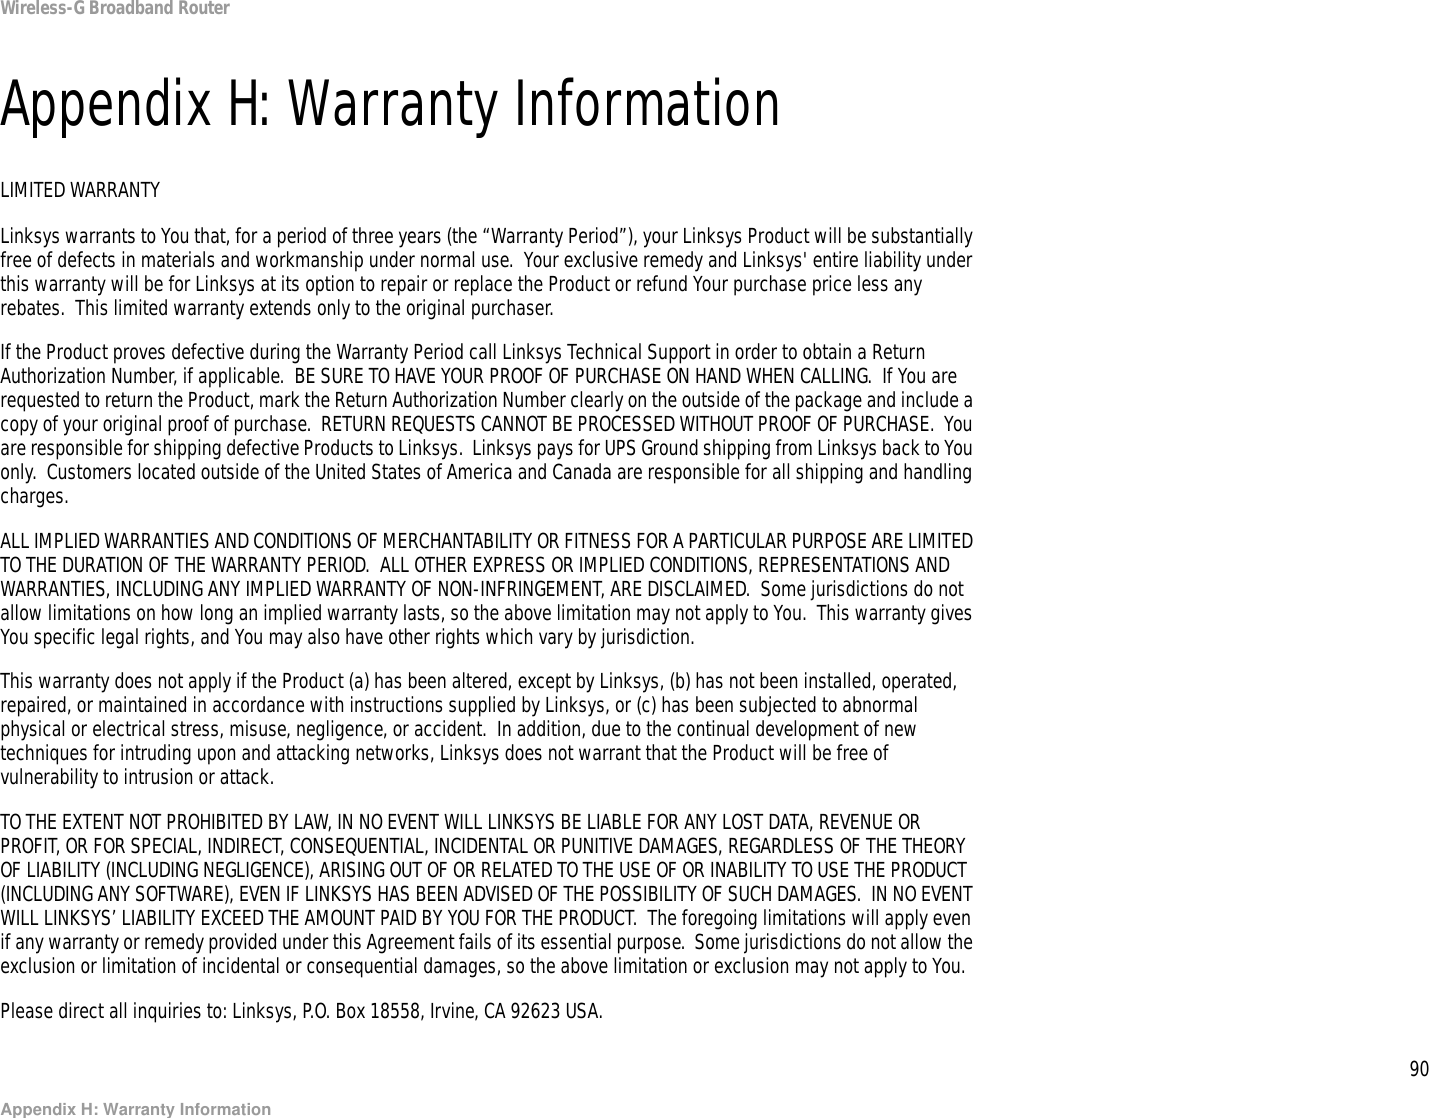 90Appendix H: Warranty InformationWireless-G Broadband RouterAppendix H: Warranty InformationLIMITED WARRANTYLinksys warrants to You that, for a period of three years (the “Warranty Period”), your Linksys Product will be substantially free of defects in materials and workmanship under normal use.  Your exclusive remedy and Linksys&apos; entire liability under this warranty will be for Linksys at its option to repair or replace the Product or refund Your purchase price less any rebates.  This limited warranty extends only to the original purchaser.  If the Product proves defective during the Warranty Period call Linksys Technical Support in order to obtain a Return Authorization Number, if applicable.  BE SURE TO HAVE YOUR PROOF OF PURCHASE ON HAND WHEN CALLING.  If You are requested to return the Product, mark the Return Authorization Number clearly on the outside of the package and include a copy of your original proof of purchase.  RETURN REQUESTS CANNOT BE PROCESSED WITHOUT PROOF OF PURCHASE.  You are responsible for shipping defective Products to Linksys.  Linksys pays for UPS Ground shipping from Linksys back to You only.  Customers located outside of the United States of America and Canada are responsible for all shipping and handling charges. ALL IMPLIED WARRANTIES AND CONDITIONS OF MERCHANTABILITY OR FITNESS FOR A PARTICULAR PURPOSE ARE LIMITED TO THE DURATION OF THE WARRANTY PERIOD.  ALL OTHER EXPRESS OR IMPLIED CONDITIONS, REPRESENTATIONS AND WARRANTIES, INCLUDING ANY IMPLIED WARRANTY OF NON-INFRINGEMENT, ARE DISCLAIMED.  Some jurisdictions do not allow limitations on how long an implied warranty lasts, so the above limitation may not apply to You.  This warranty gives You specific legal rights, and You may also have other rights which vary by jurisdiction.This warranty does not apply if the Product (a) has been altered, except by Linksys, (b) has not been installed, operated, repaired, or maintained in accordance with instructions supplied by Linksys, or (c) has been subjected to abnormal physical or electrical stress, misuse, negligence, or accident.  In addition, due to the continual development of new techniques for intruding upon and attacking networks, Linksys does not warrant that the Product will be free of vulnerability to intrusion or attack.TO THE EXTENT NOT PROHIBITED BY LAW, IN NO EVENT WILL LINKSYS BE LIABLE FOR ANY LOST DATA, REVENUE OR PROFIT, OR FOR SPECIAL, INDIRECT, CONSEQUENTIAL, INCIDENTAL OR PUNITIVE DAMAGES, REGARDLESS OF THE THEORY OF LIABILITY (INCLUDING NEGLIGENCE), ARISING OUT OF OR RELATED TO THE USE OF OR INABILITY TO USE THE PRODUCT (INCLUDING ANY SOFTWARE), EVEN IF LINKSYS HAS BEEN ADVISED OF THE POSSIBILITY OF SUCH DAMAGES.  IN NO EVENT WILL LINKSYS’ LIABILITY EXCEED THE AMOUNT PAID BY YOU FOR THE PRODUCT.  The foregoing limitations will apply even if any warranty or remedy provided under this Agreement fails of its essential purpose.  Some jurisdictions do not allow the exclusion or limitation of incidental or consequential damages, so the above limitation or exclusion may not apply to You.Please direct all inquiries to: Linksys, P.O. Box 18558, Irvine, CA 92623 USA.